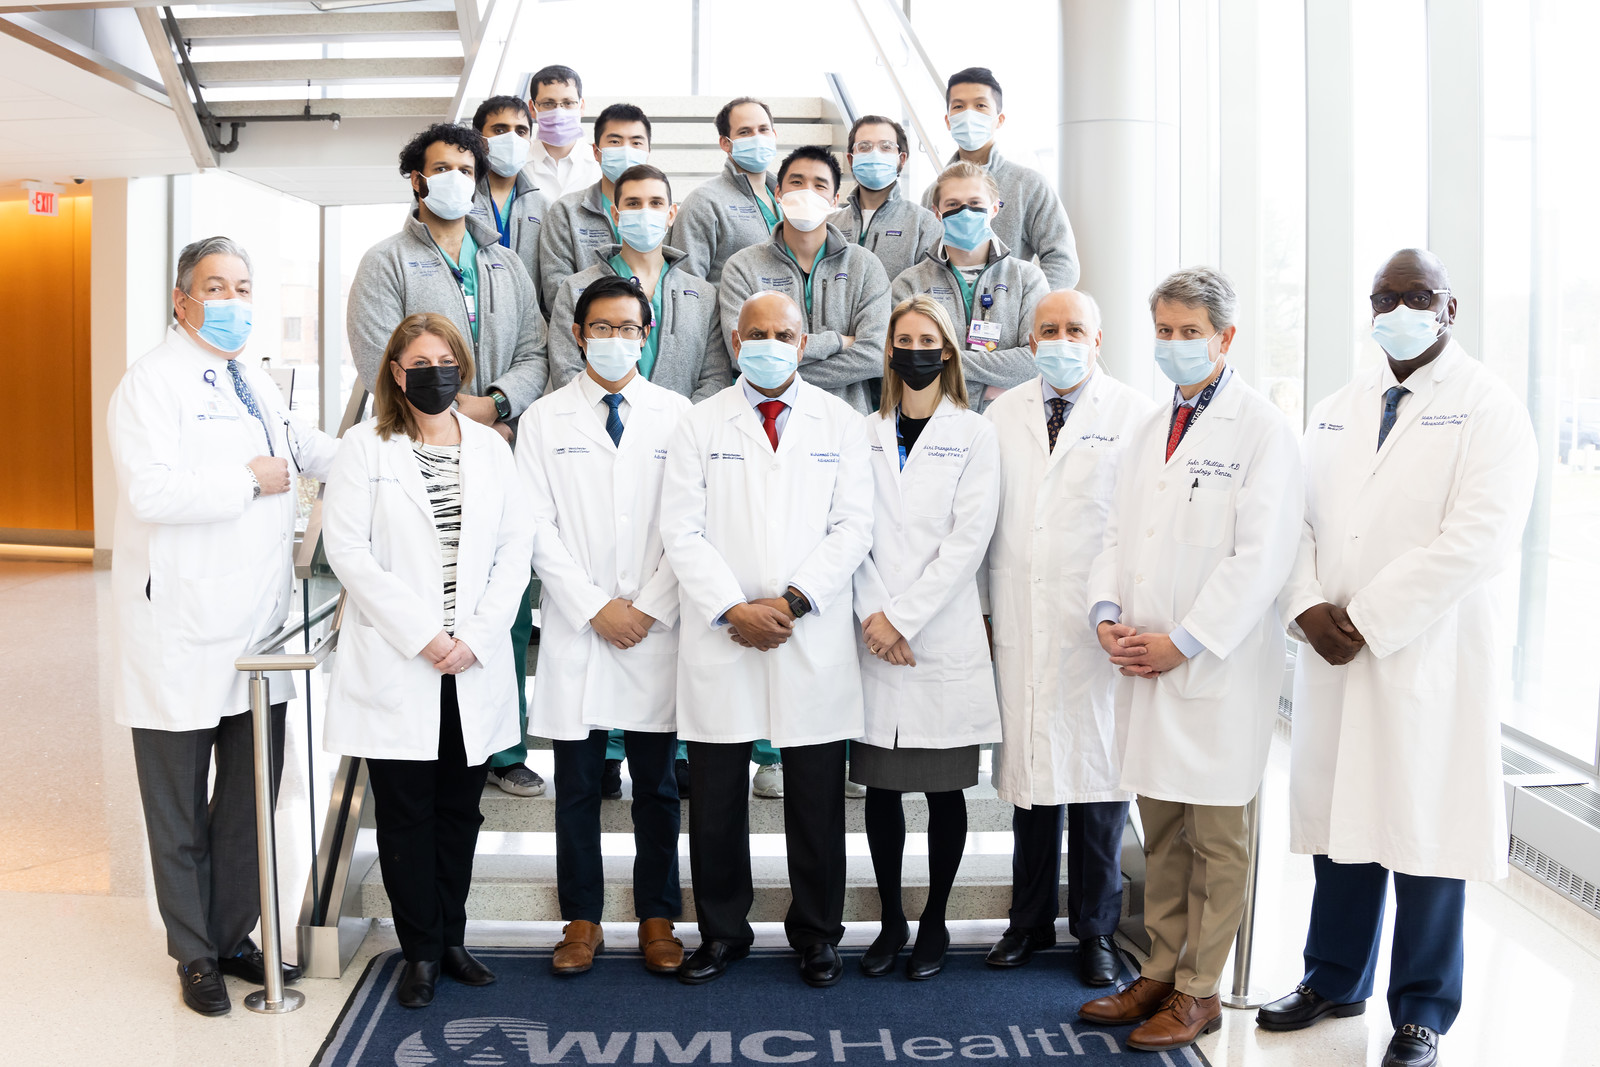 Urology Faculty and Residents at WMC